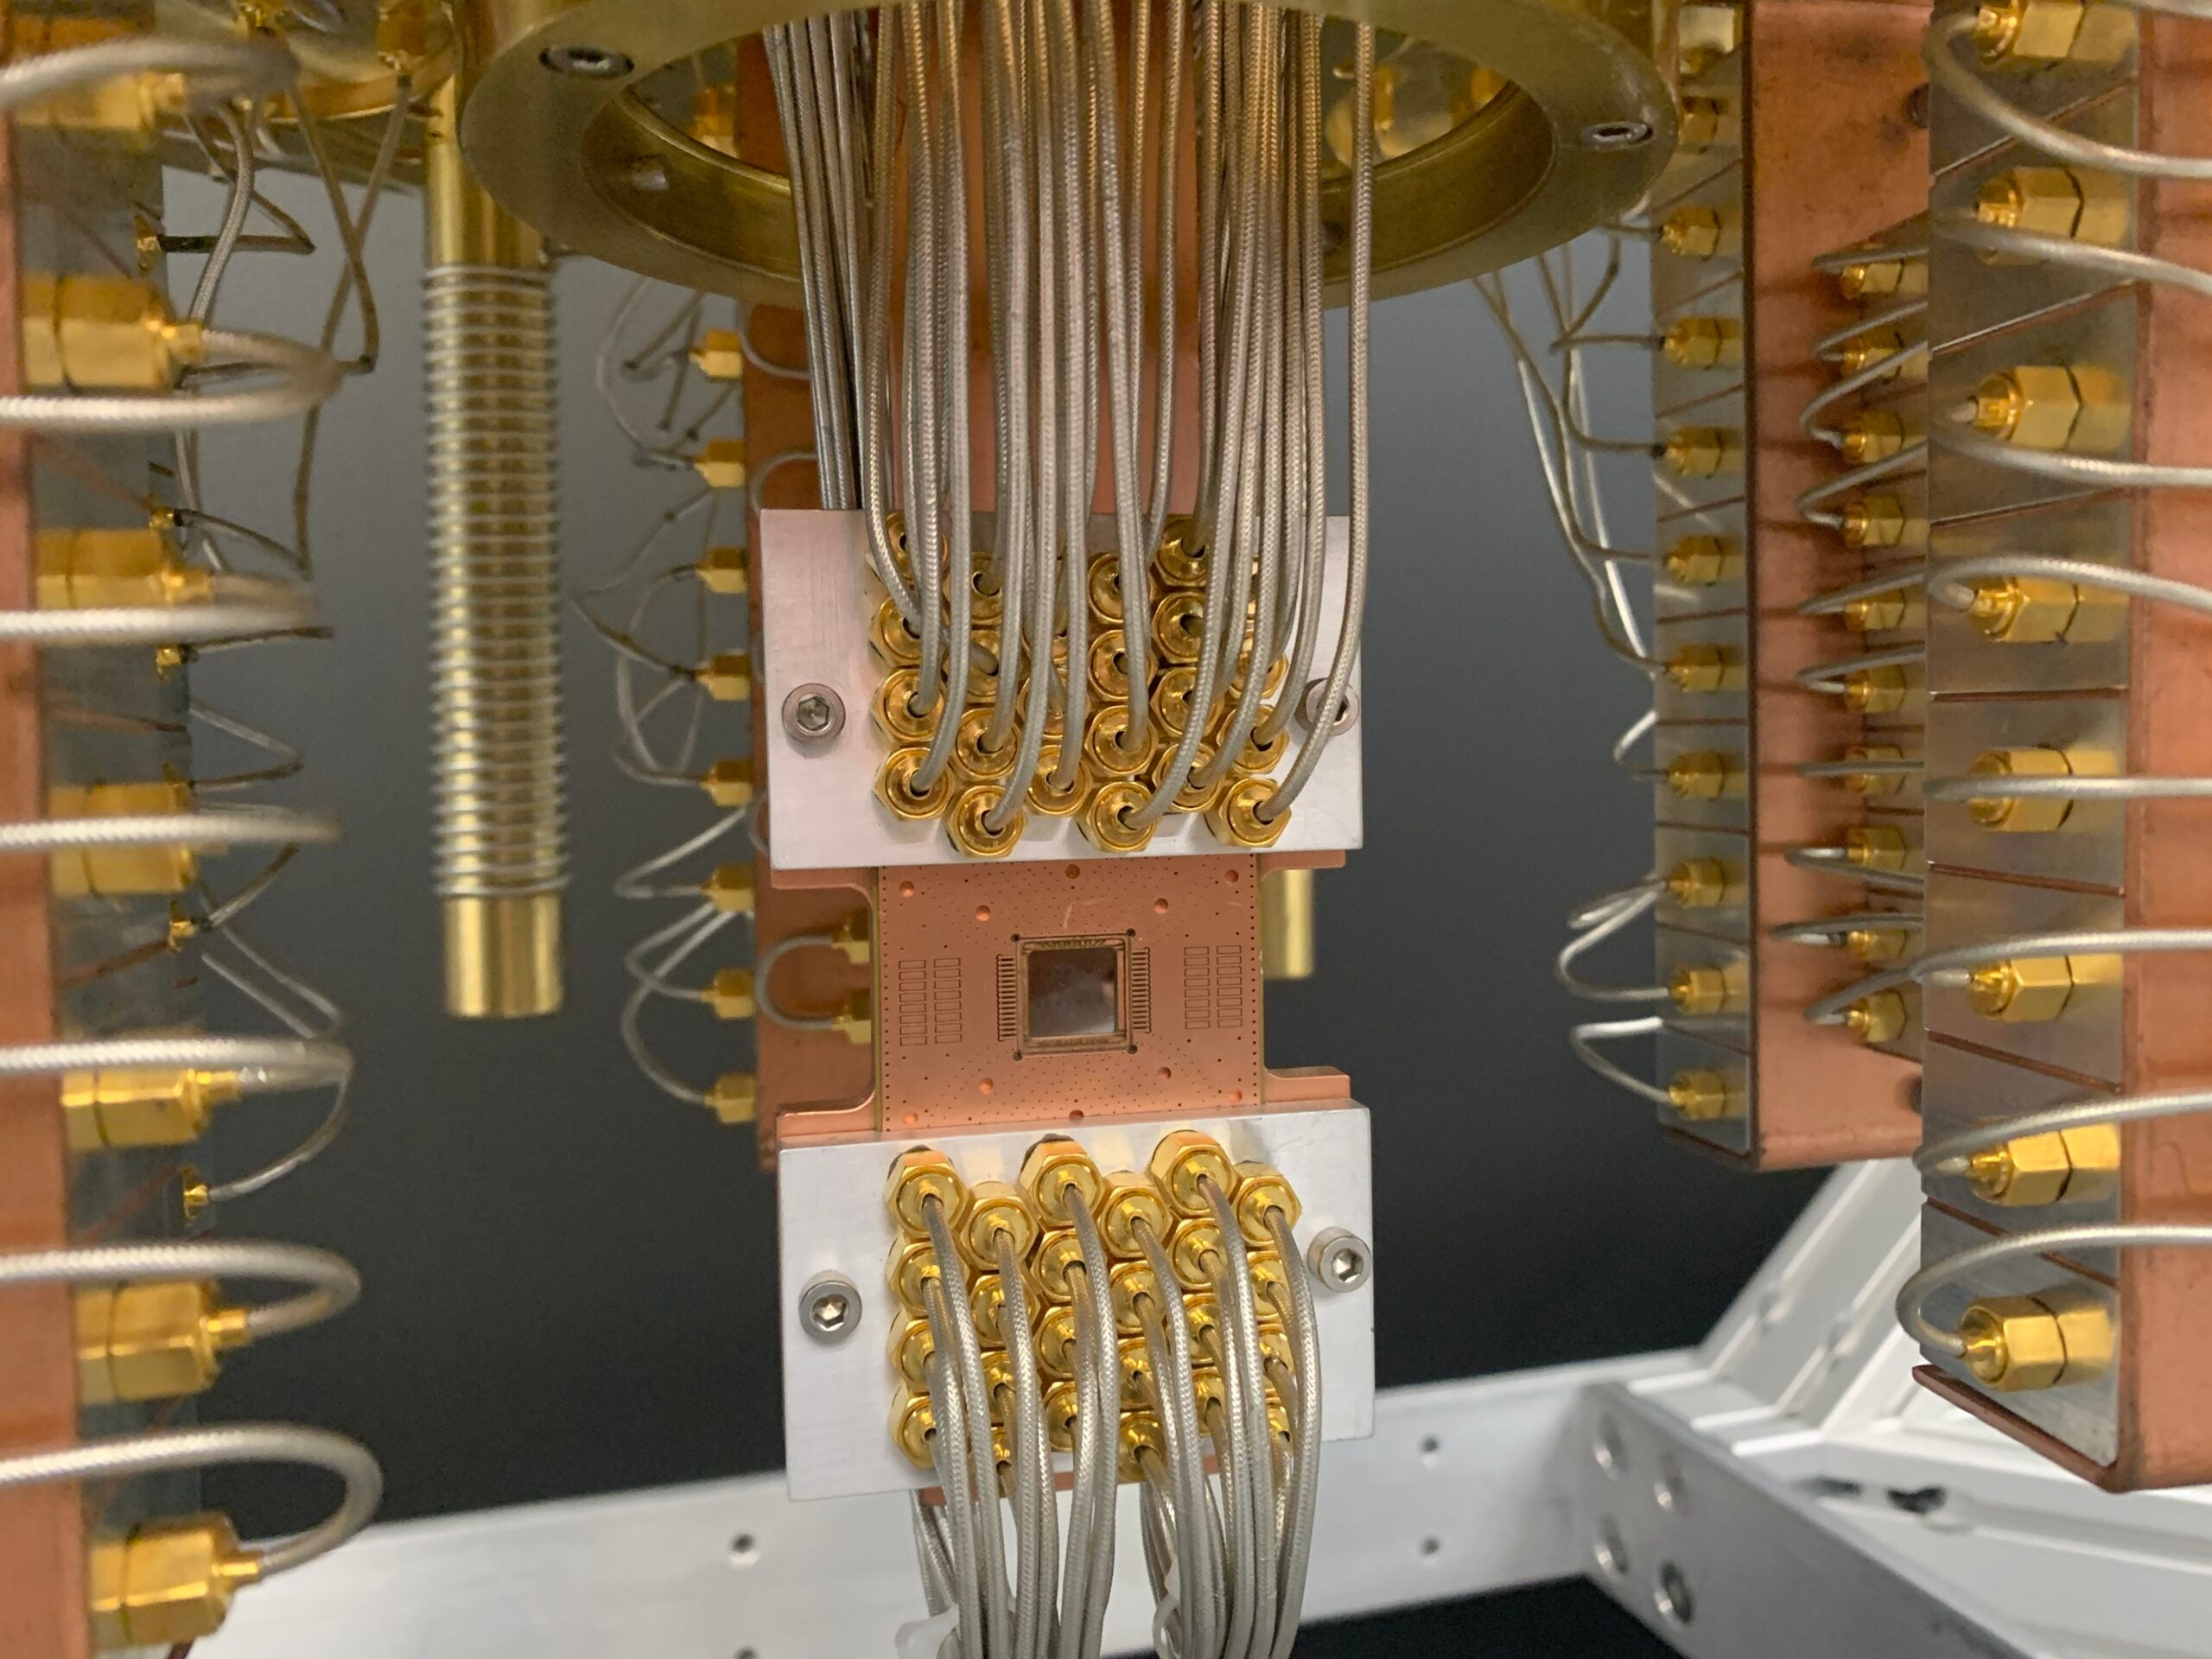 In photos: Journey to the center of a quantum computer